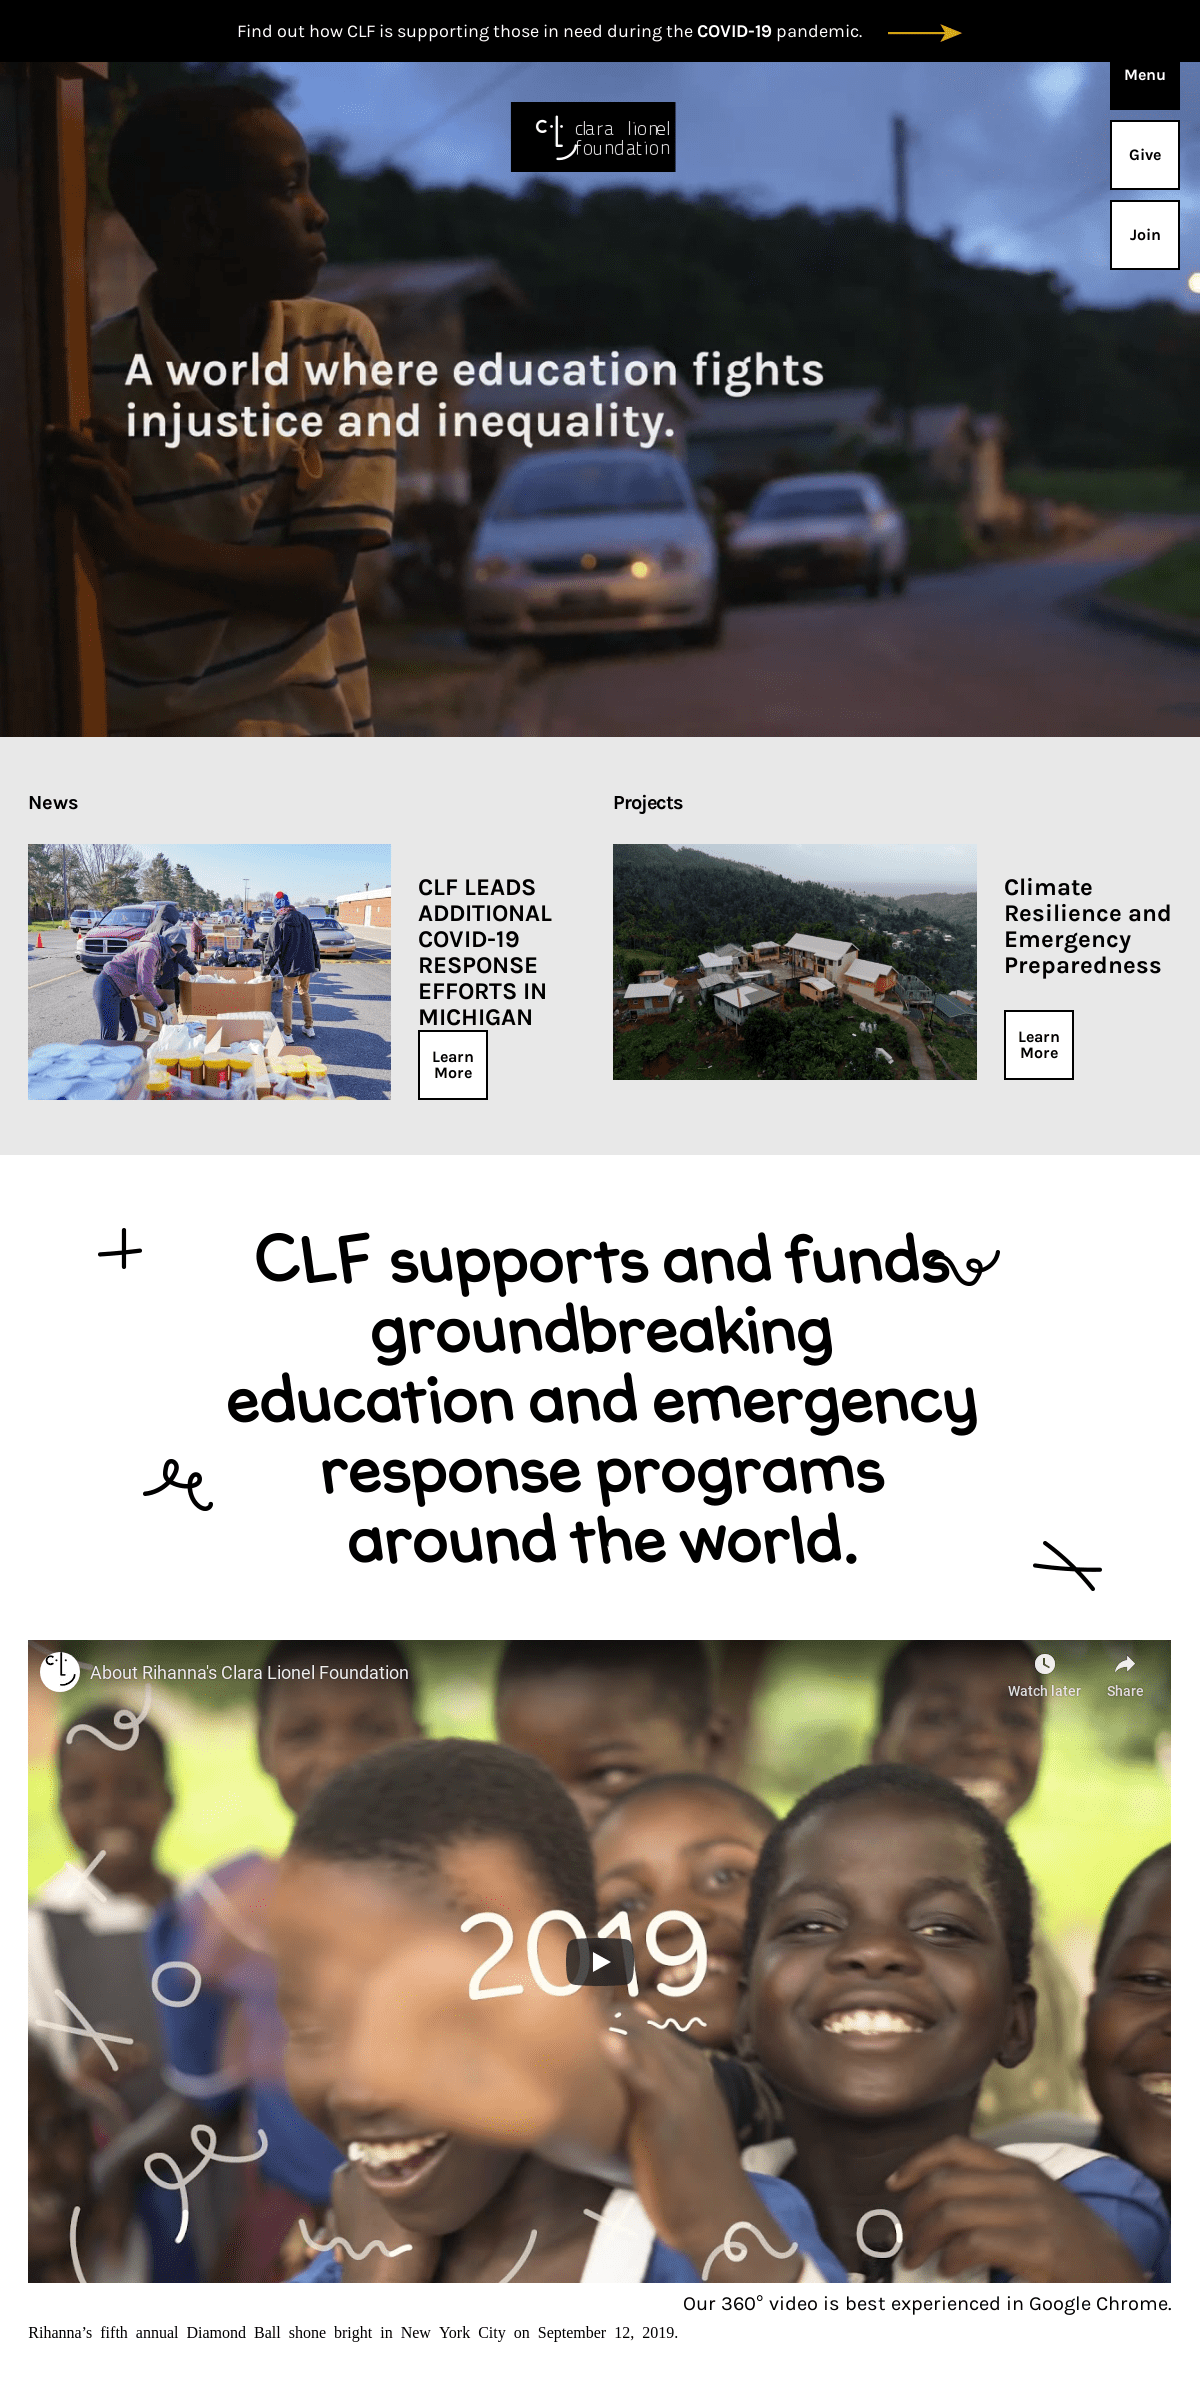 A complete backup of claralionelfoundation.org